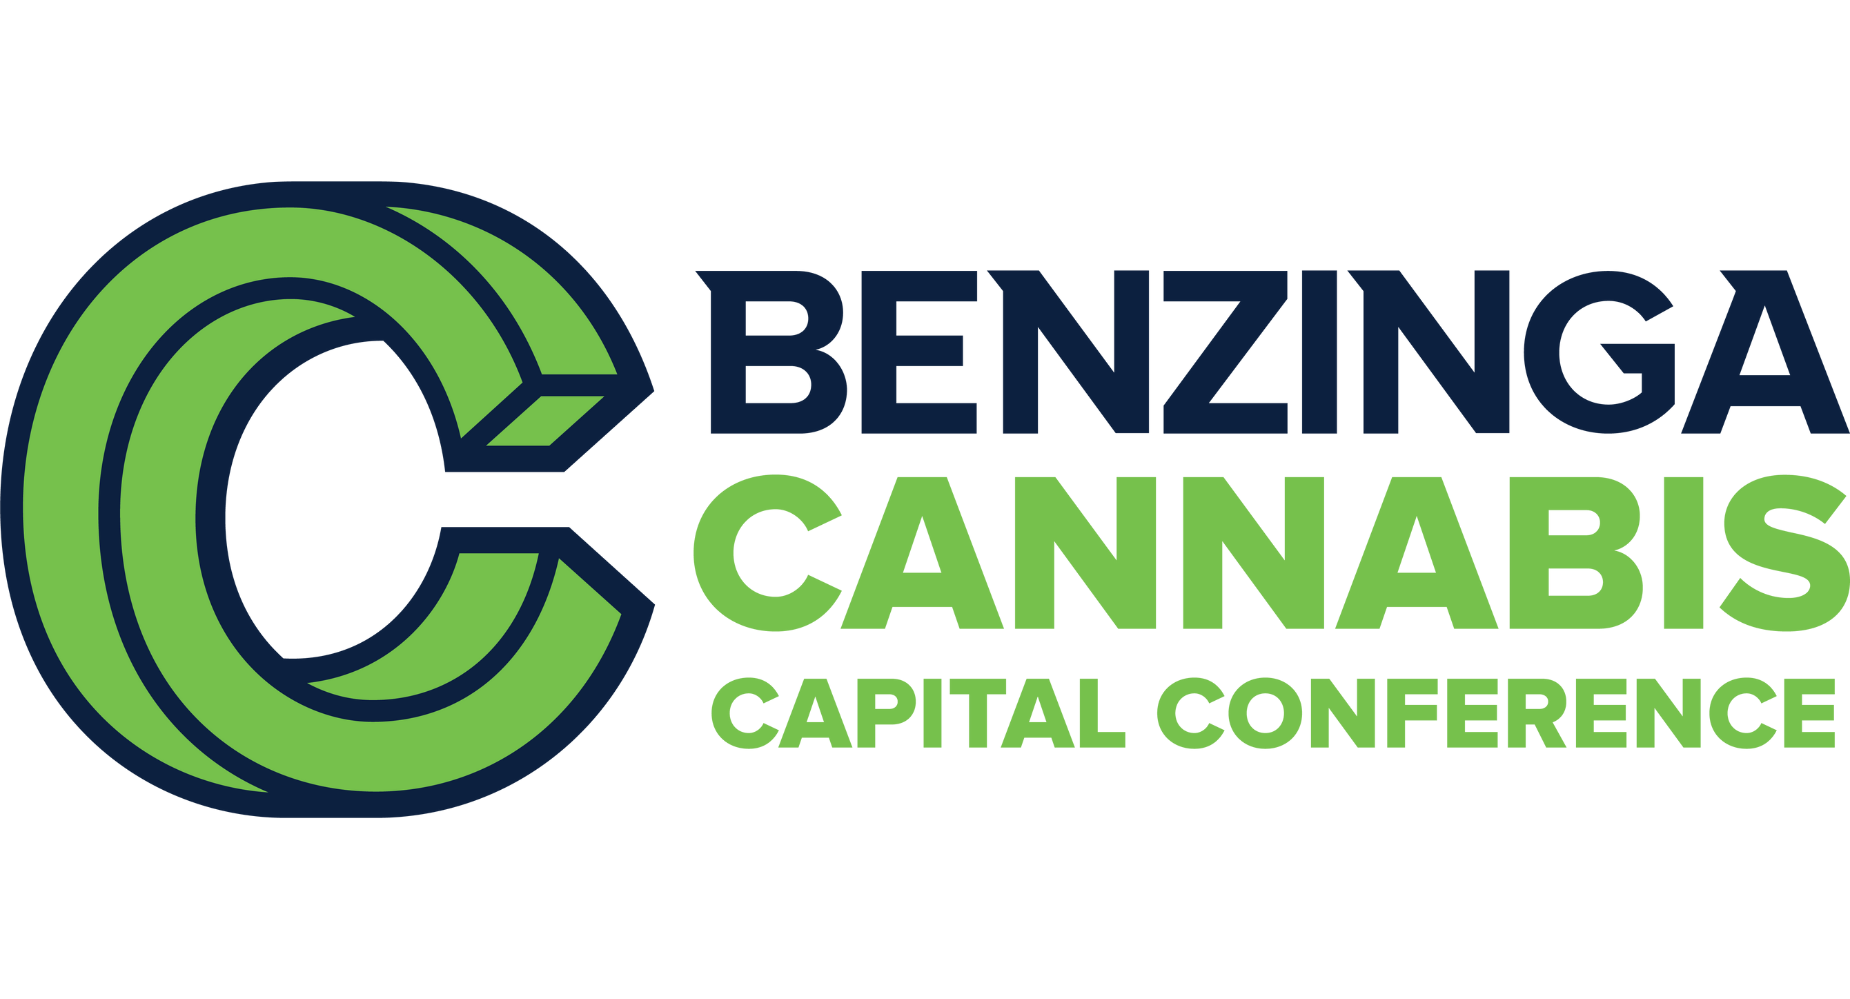 NYC-Based Leading Law Firm Zuber Lawler Leads Panel At Benzinga Cannabis Capital Conference